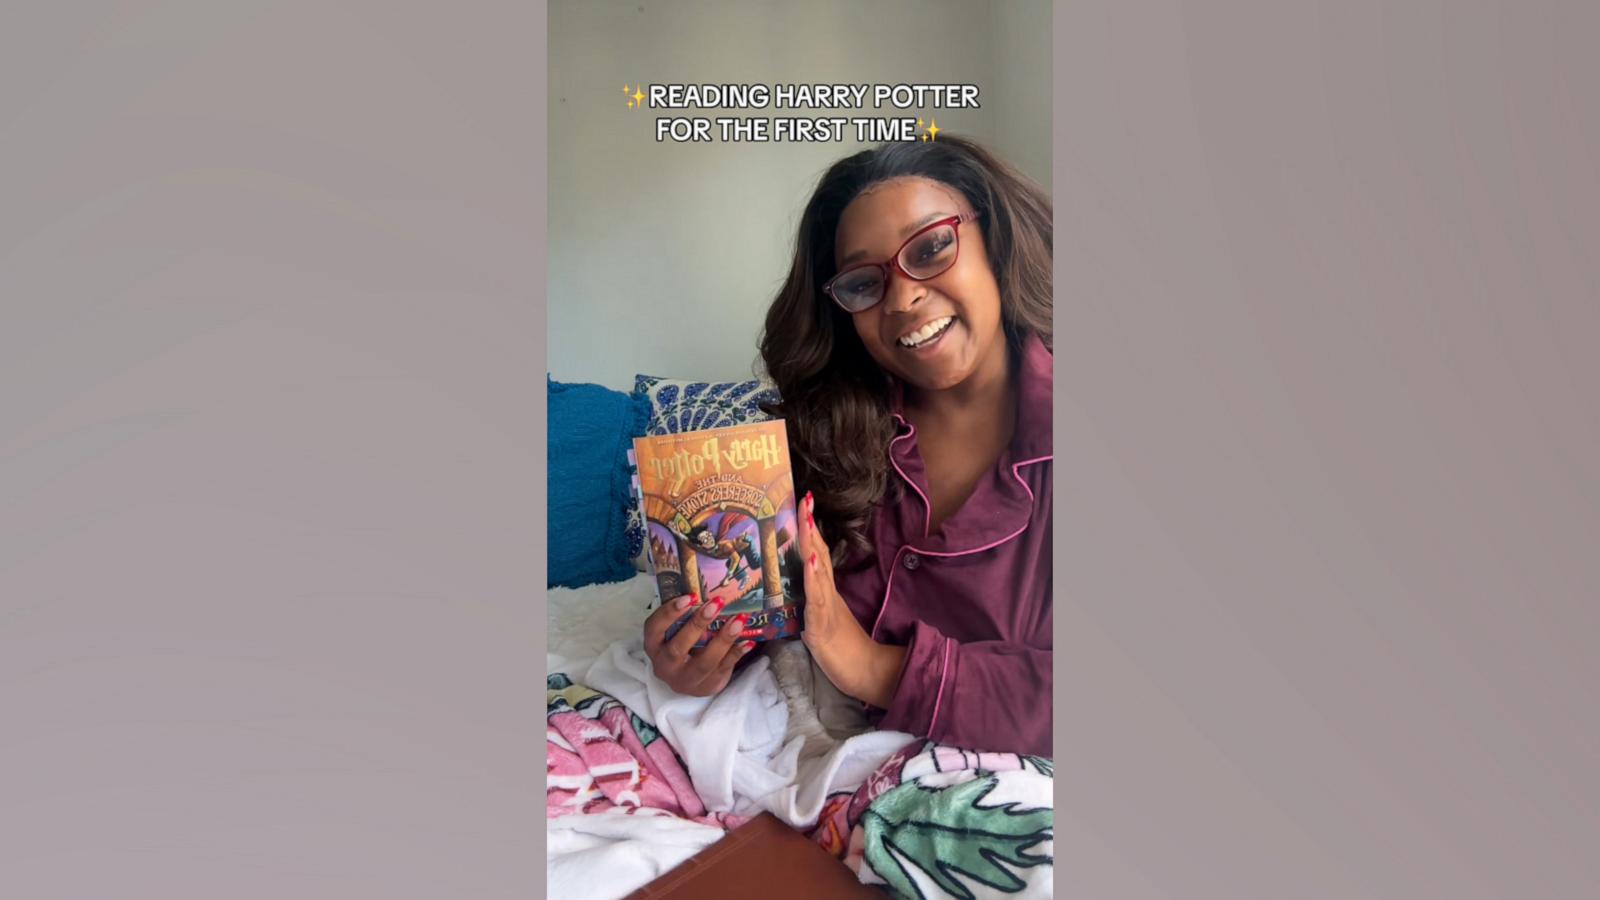 VIDEO: Meet the woman sharing her emotional journey online while reading 'Harry Potter'